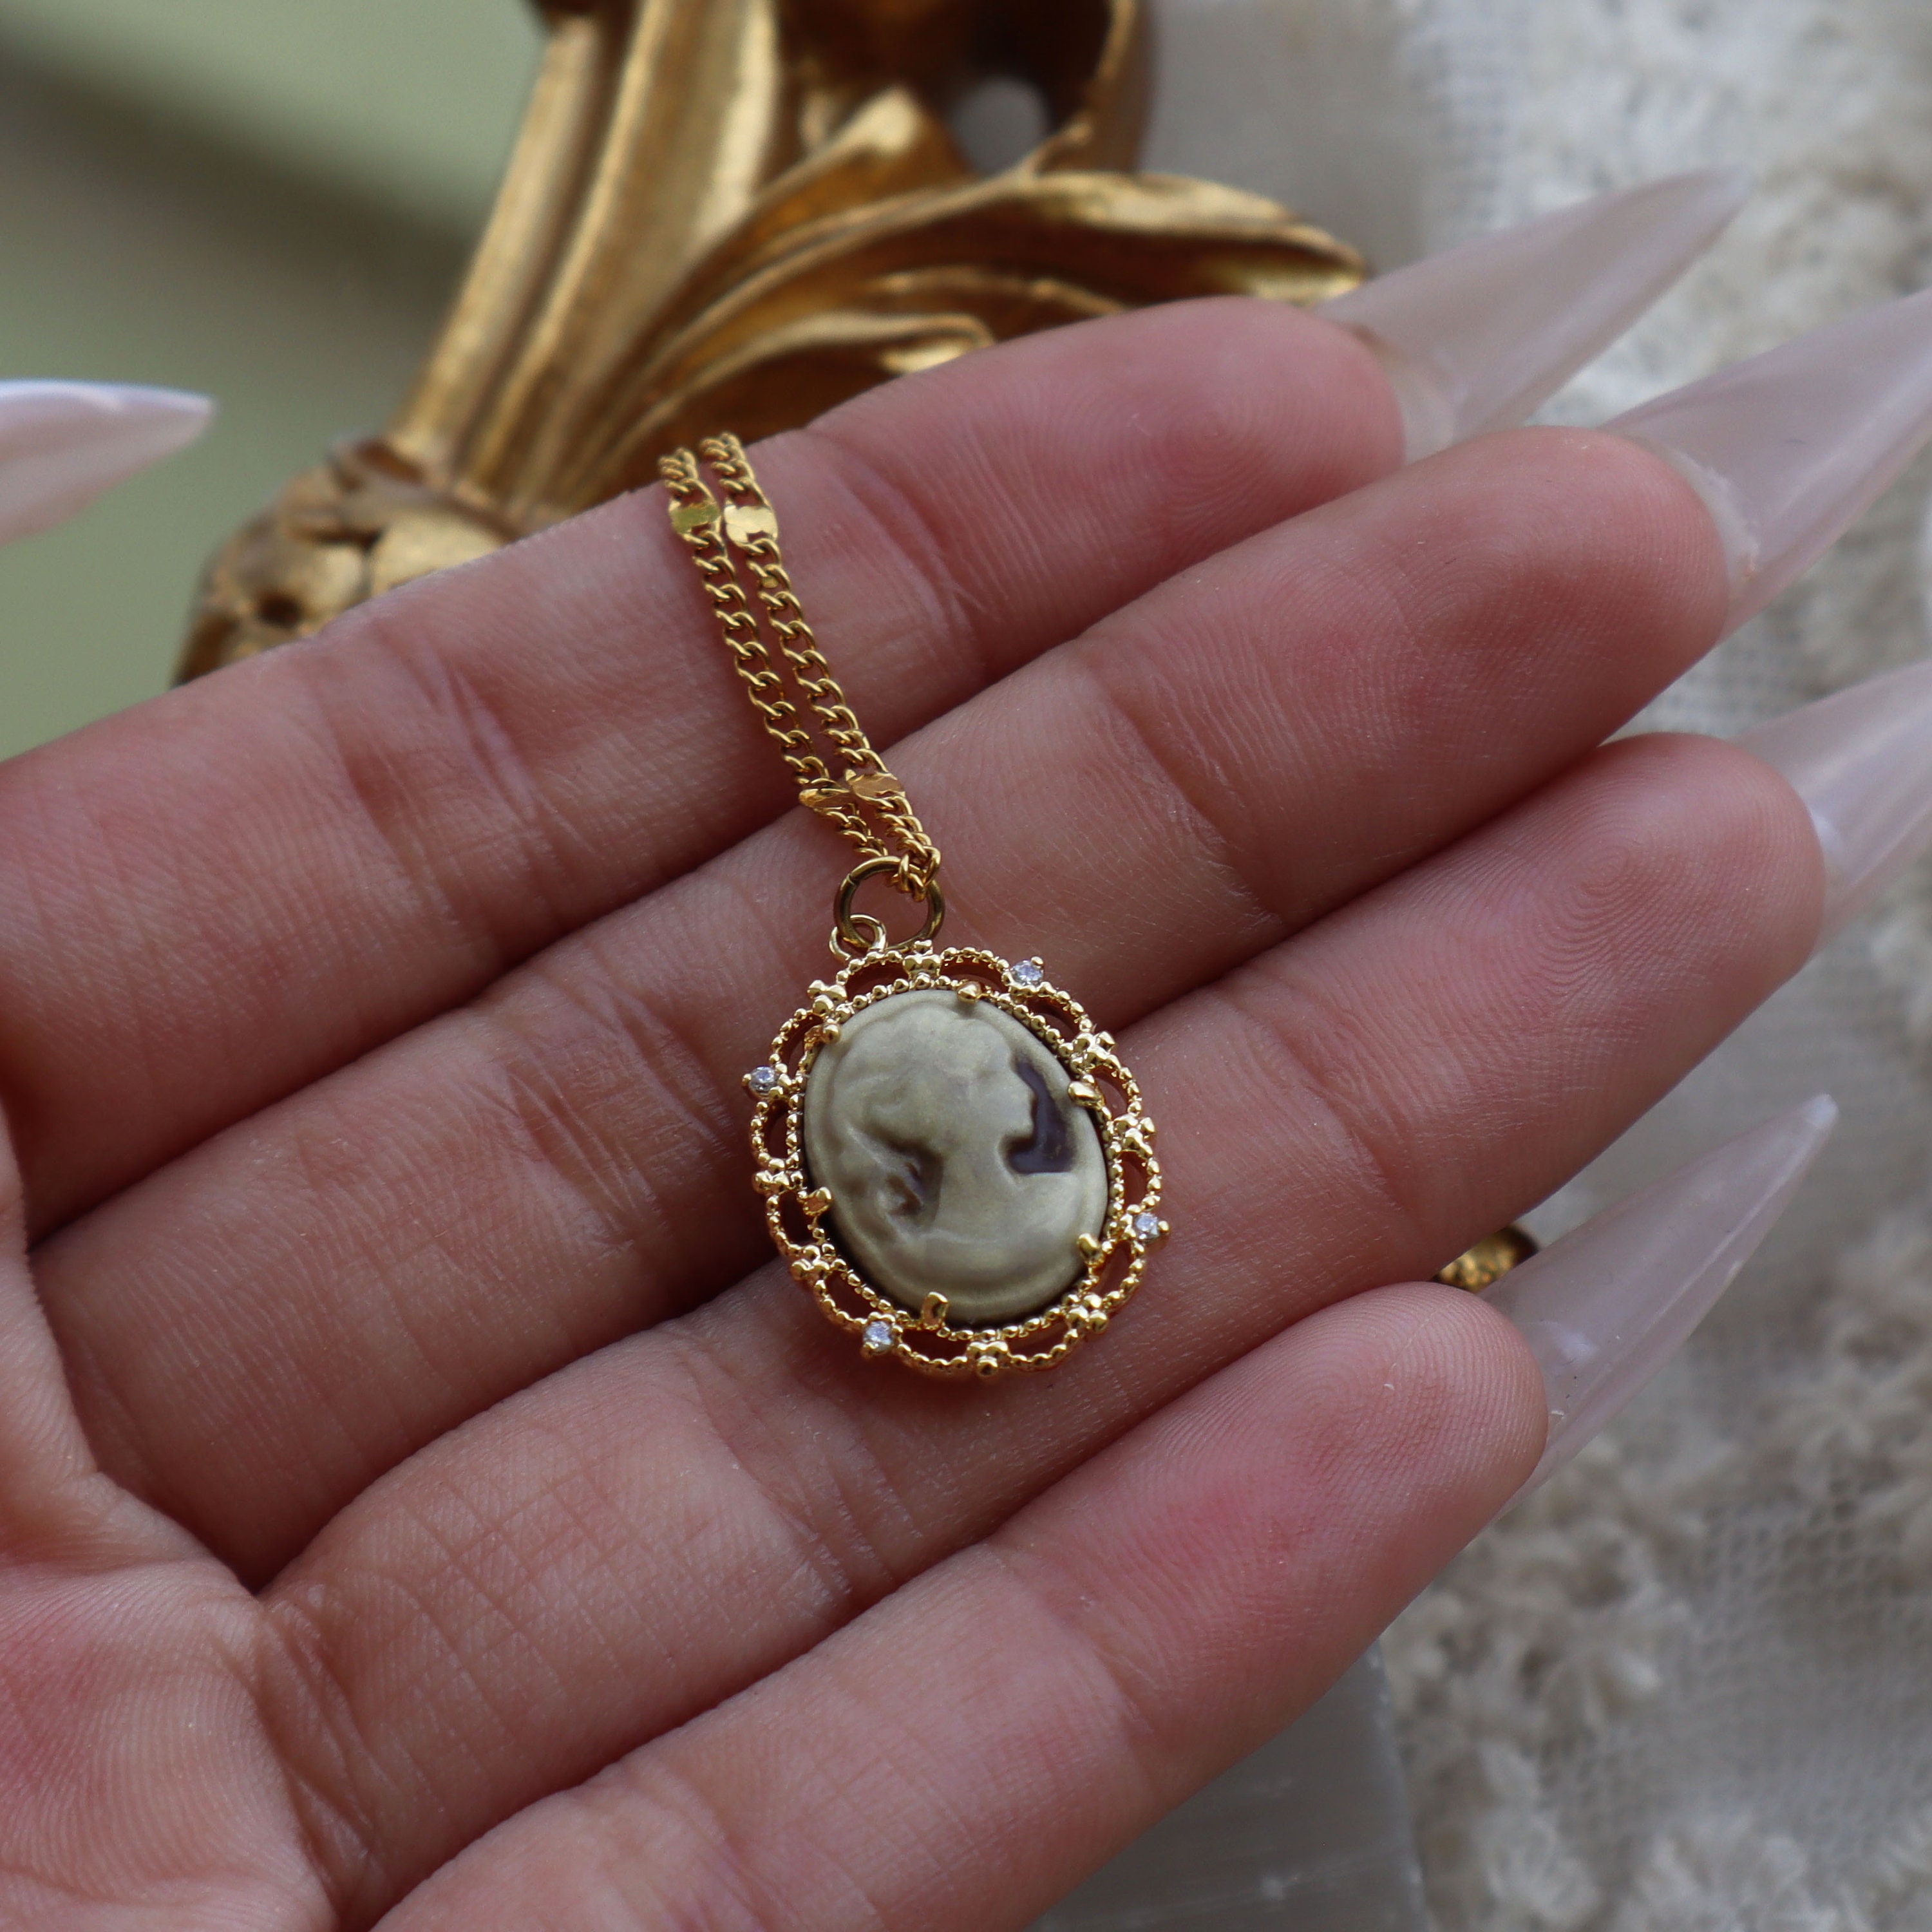 GOLD CAMEO NECKLACE